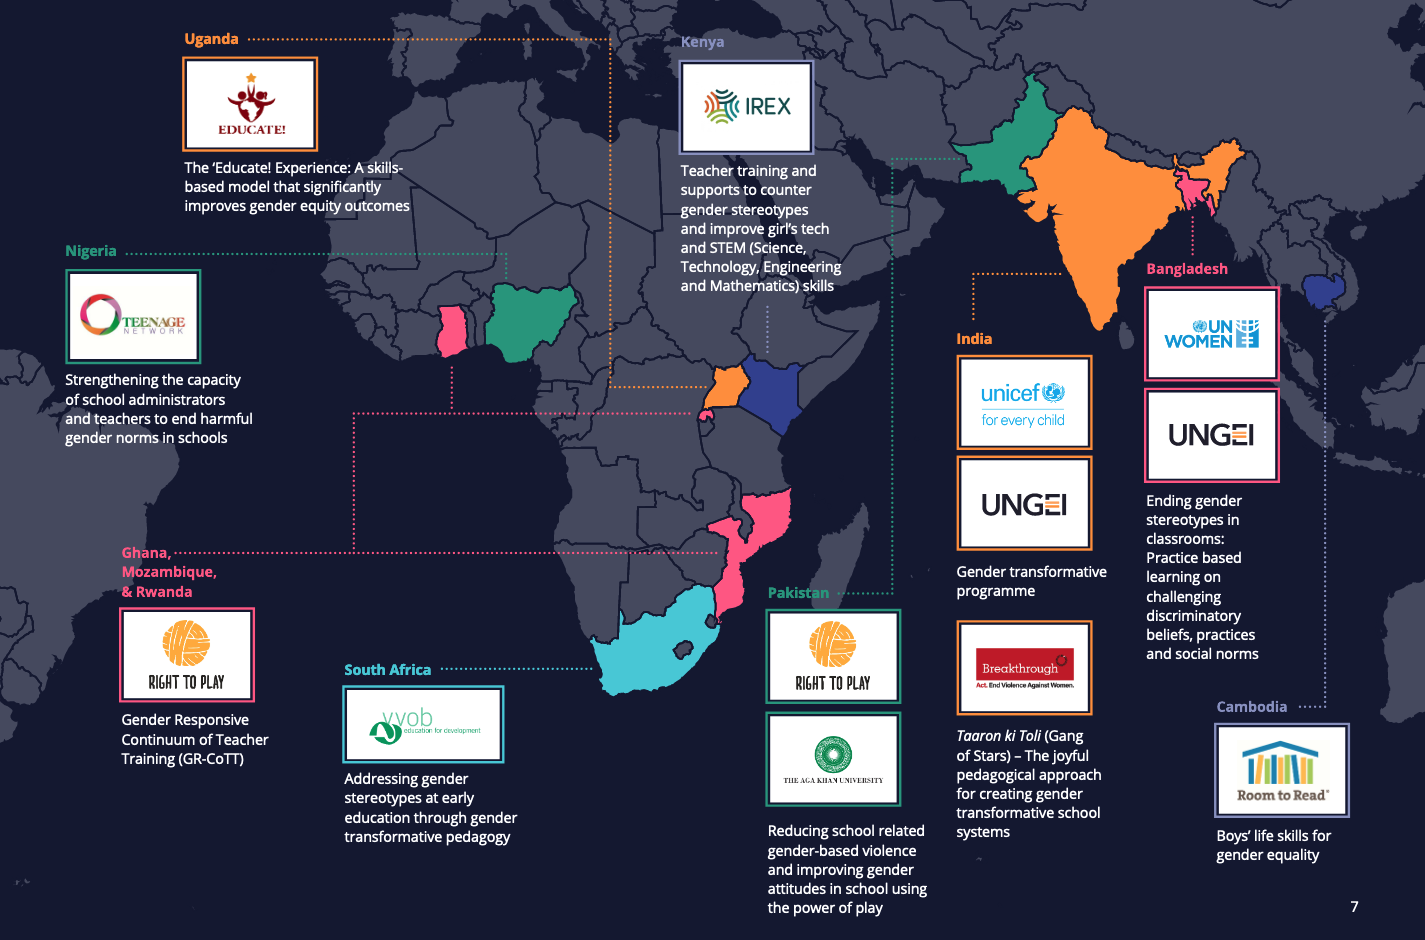 Map of 13 interventions to end gender stereotypes that were implemented in 10 LMICs